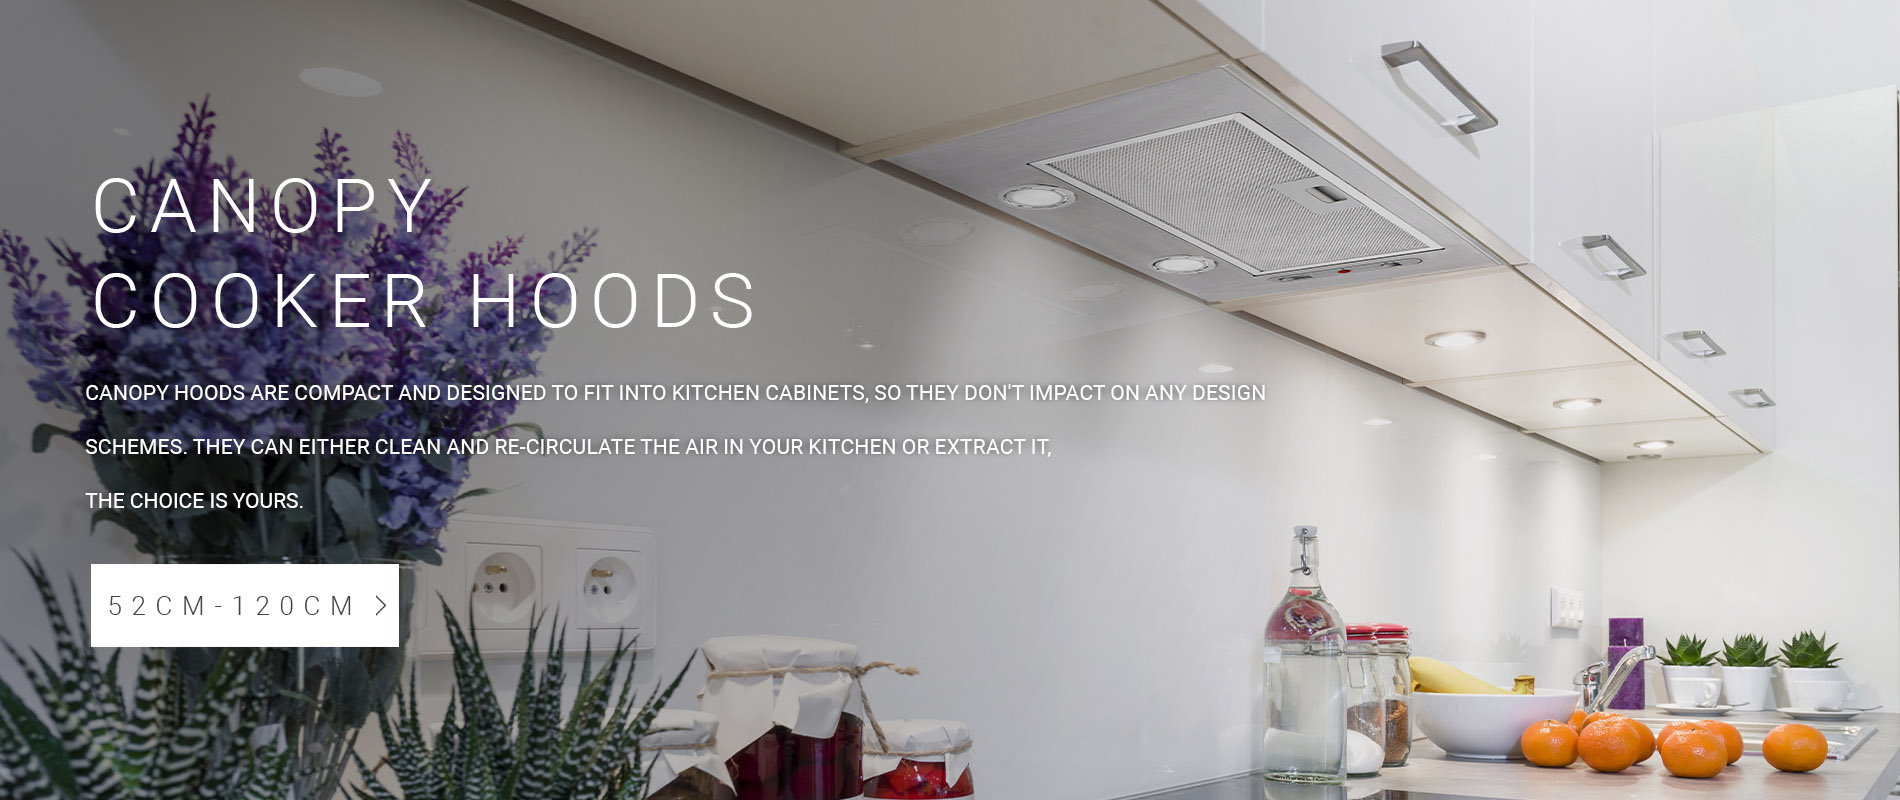 canopy cooker hoods for kitchens